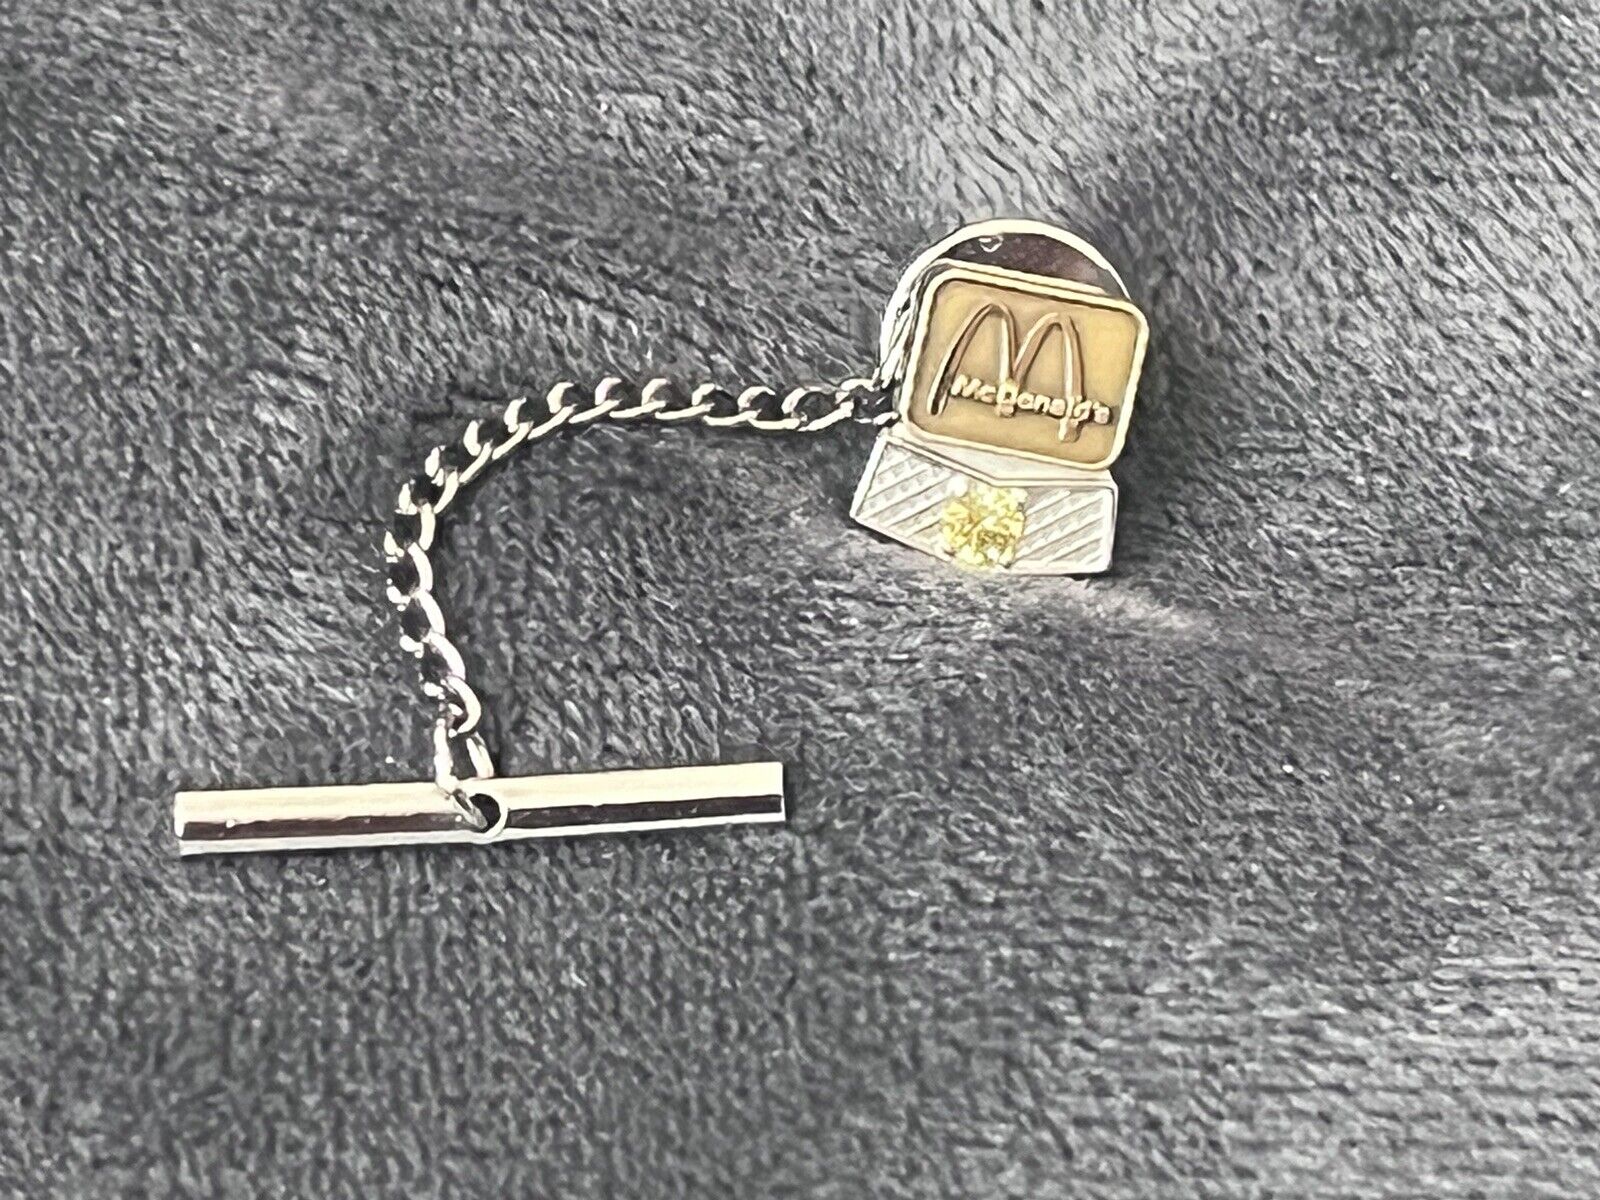 McDONALDS 14k GOLD CTO EMPLOYEE SERVICE PIN WITH CITRINE STONE